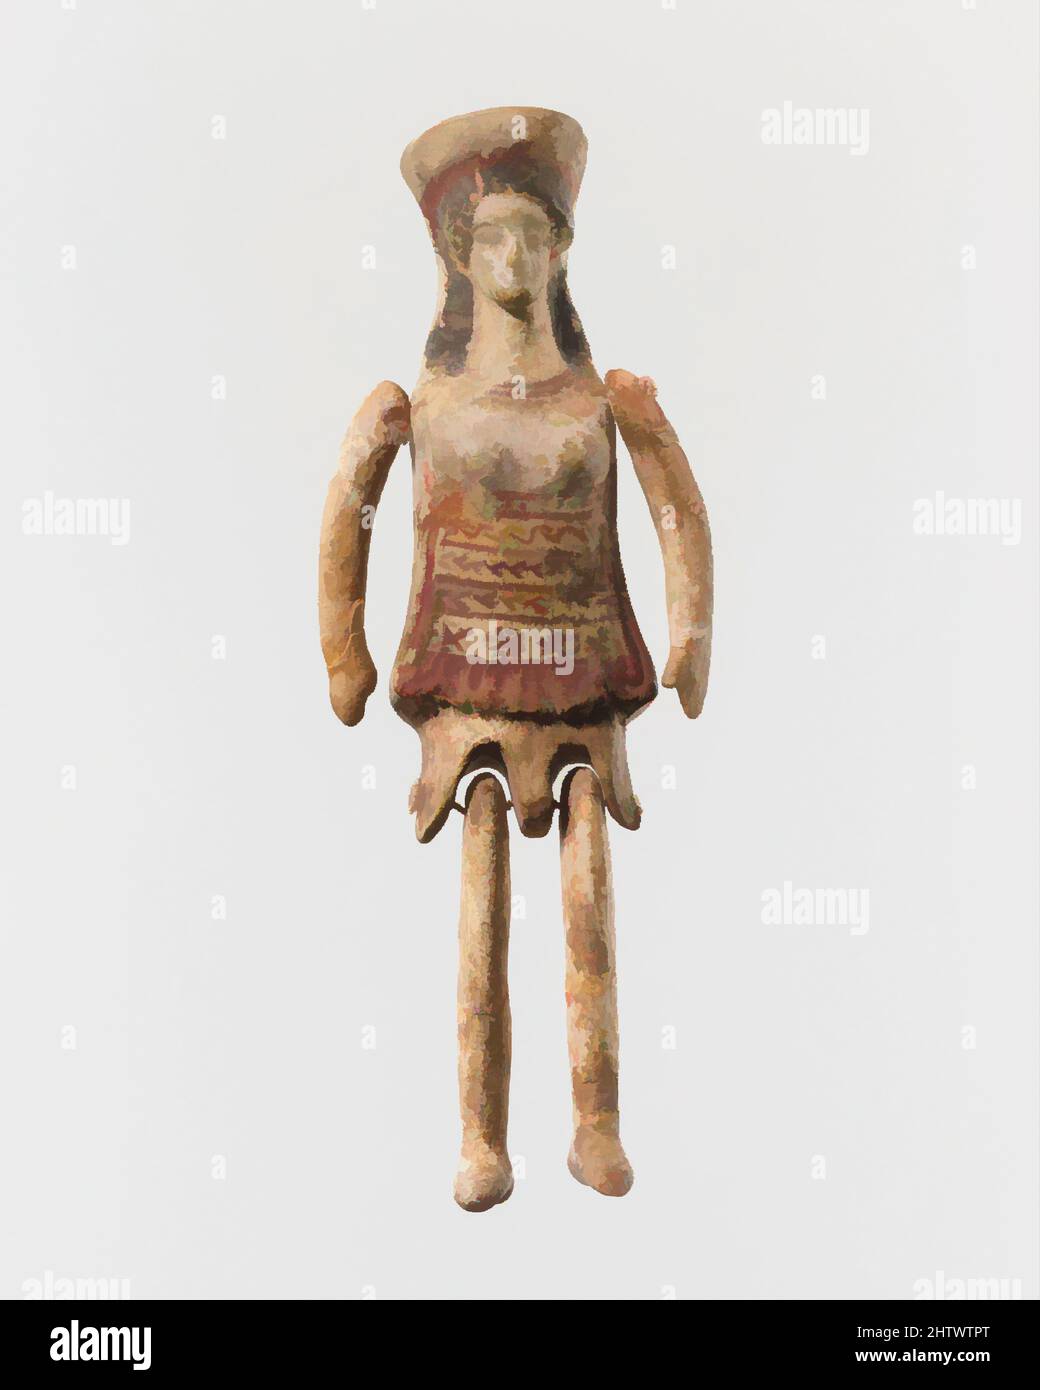 Art inspired by Terracotta jointed 'doll', Classical, 5th century B.C., Greek, Corinthian, Terracotta, H. 4 3/4 in. (12 cm), Terracottas, Many examples of such small jointed figurines have been found in tombs, sanctuaries, and terracotta factories. Their attire—a cylindrical polos (, Classic works modernized by Artotop with a splash of modernity. Shapes, color and value, eye-catching visual impact on art. Emotions through freedom of artworks in a contemporary way. A timeless message pursuing a wildly creative new direction. Artists turning to the digital medium and creating the Artotop NFT Stock Photo